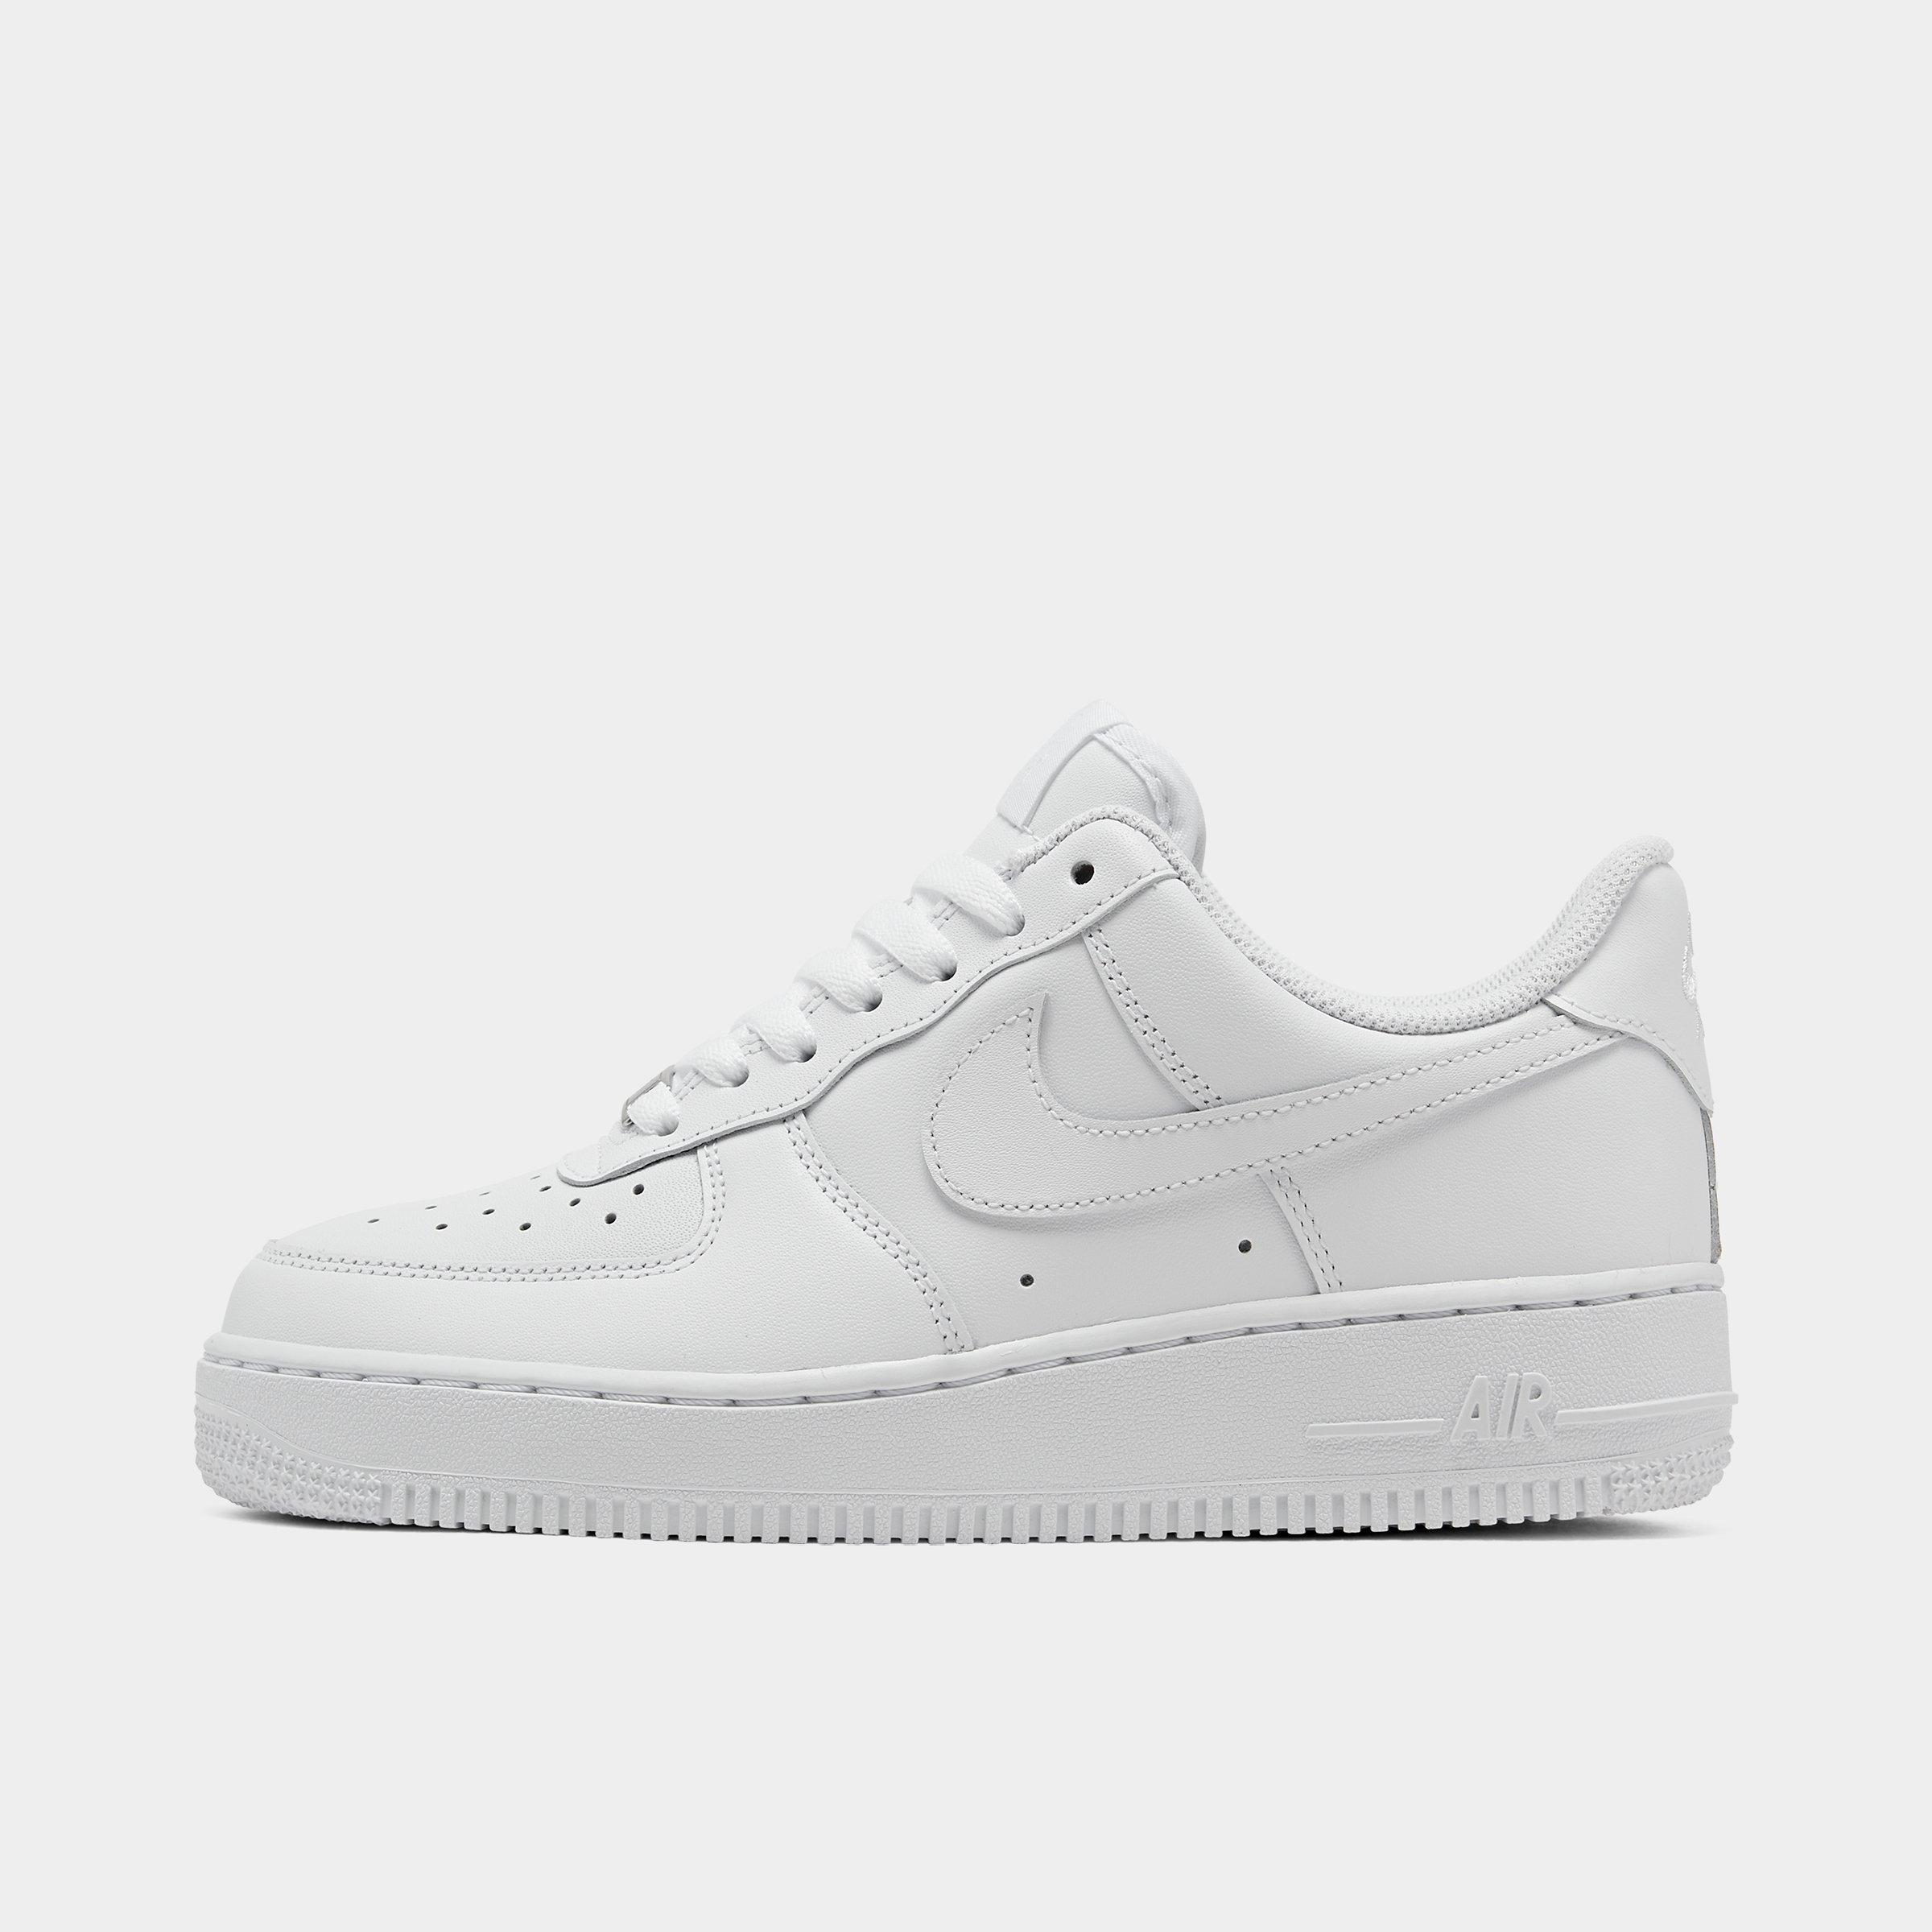 air force ones for sale